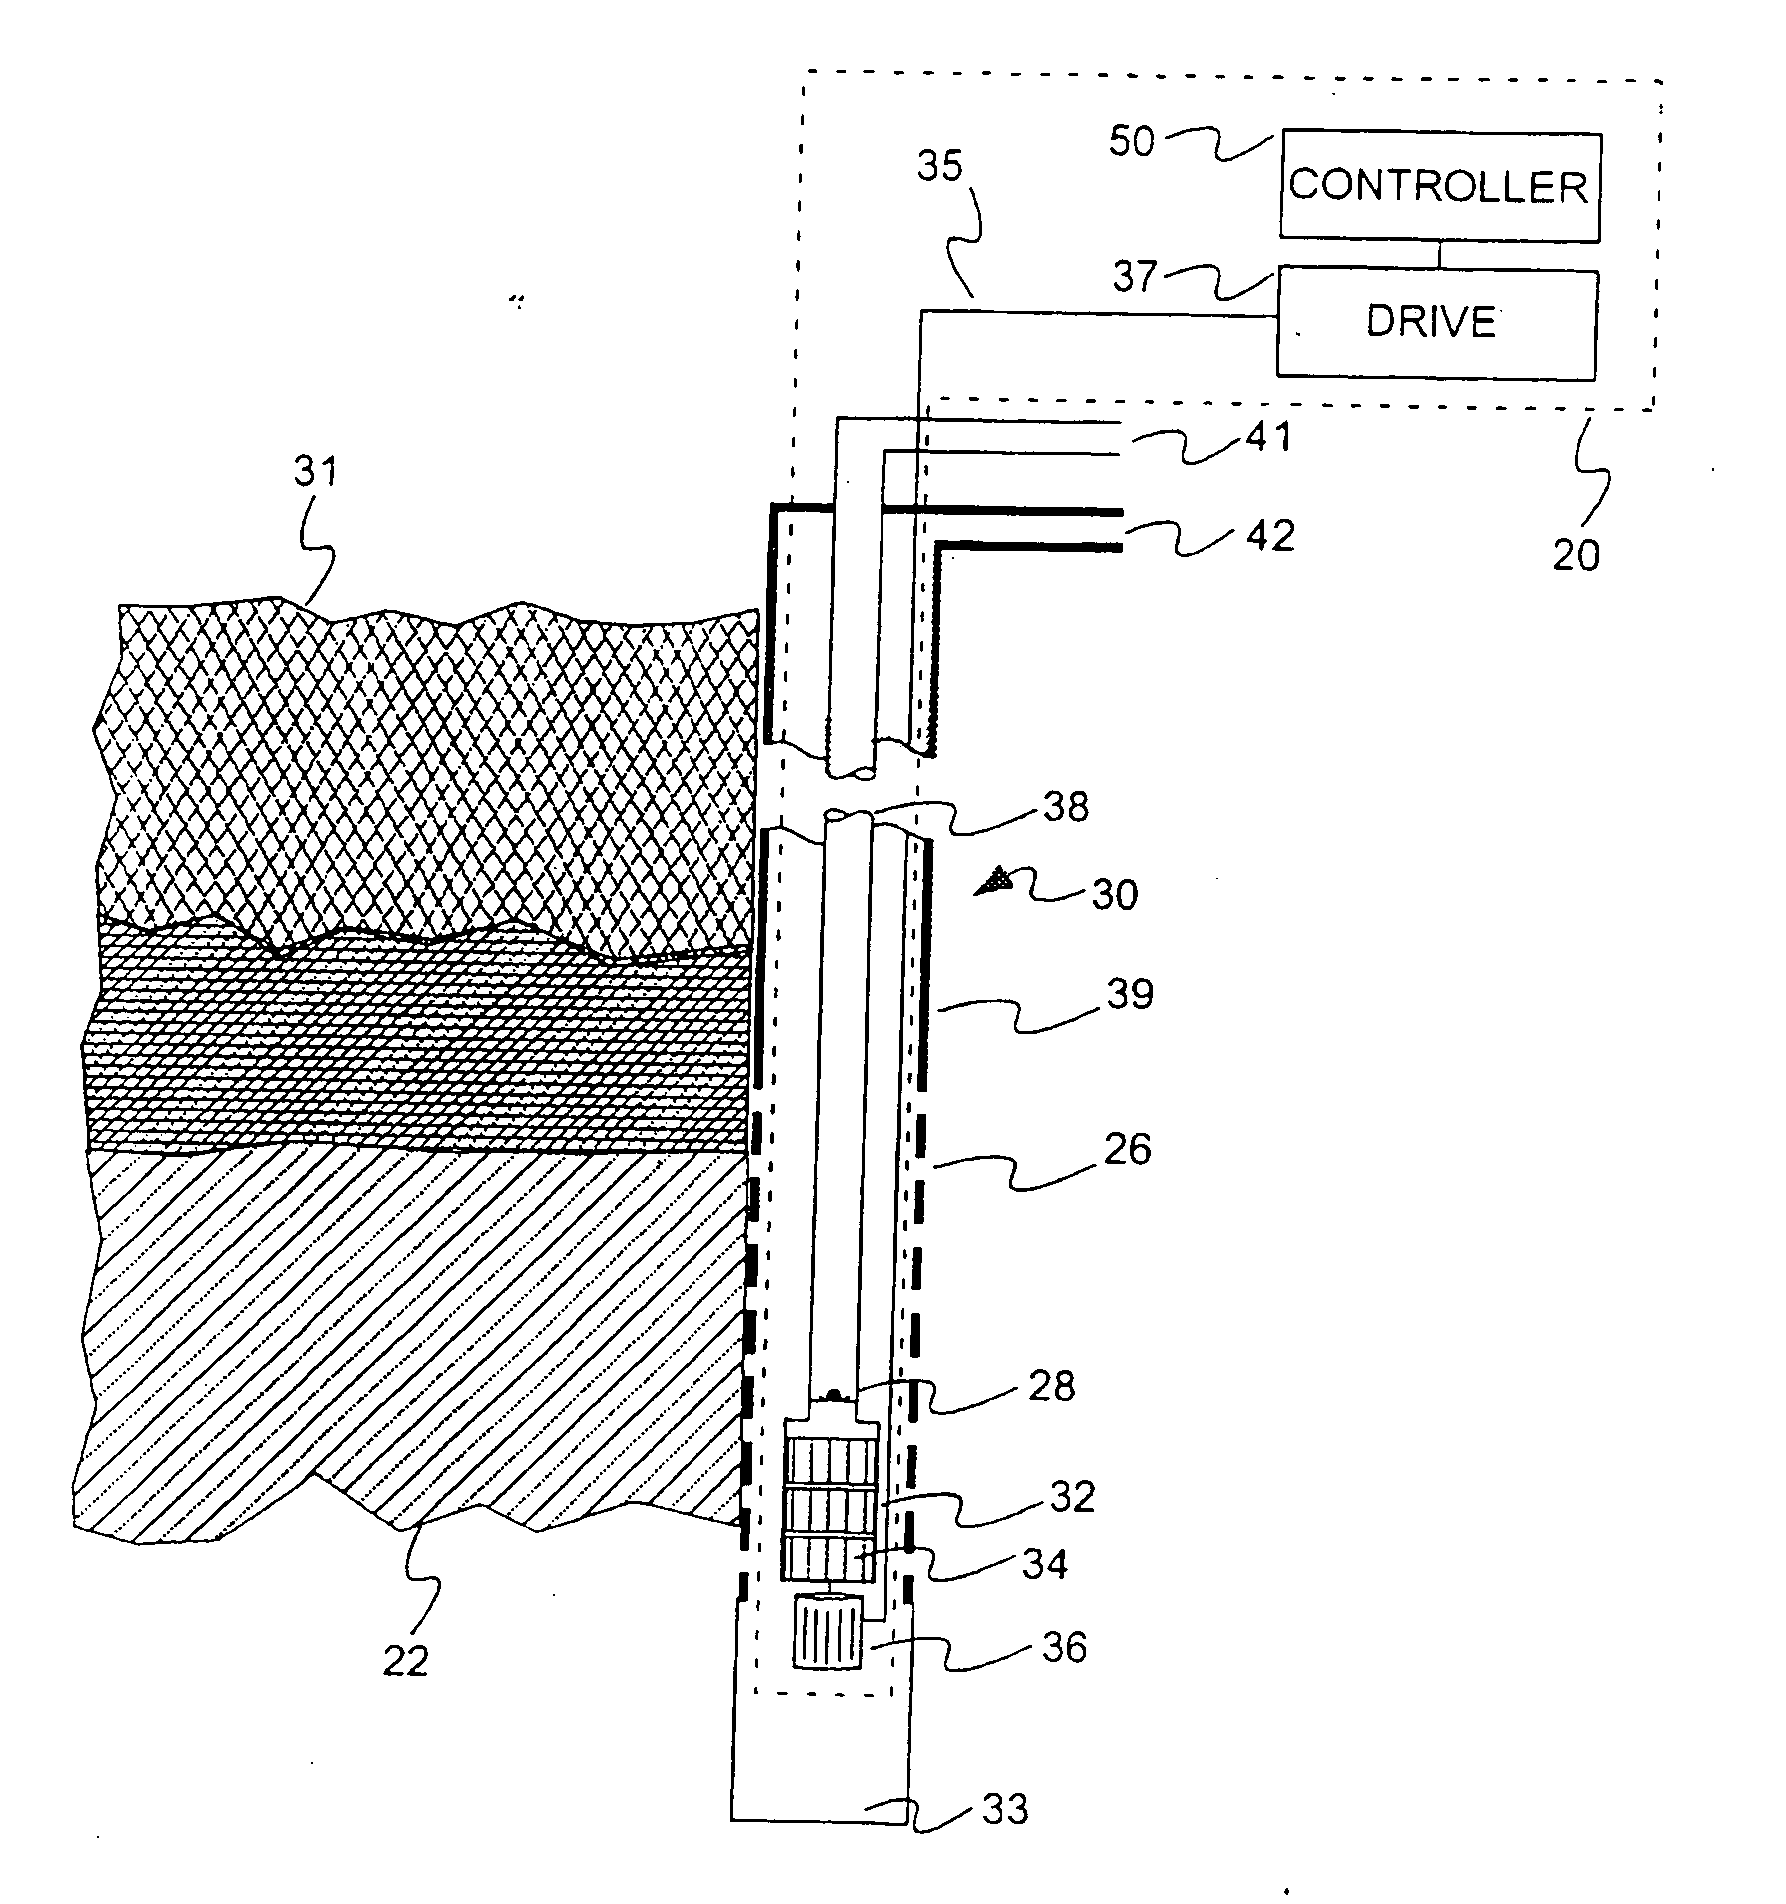 Determination And Control Of Wellbore Fluid Level, Output Flow, And Desired Pump Operating Speed, Using A Control System For A Centrifugal Pump Disposed Within The Wellbore